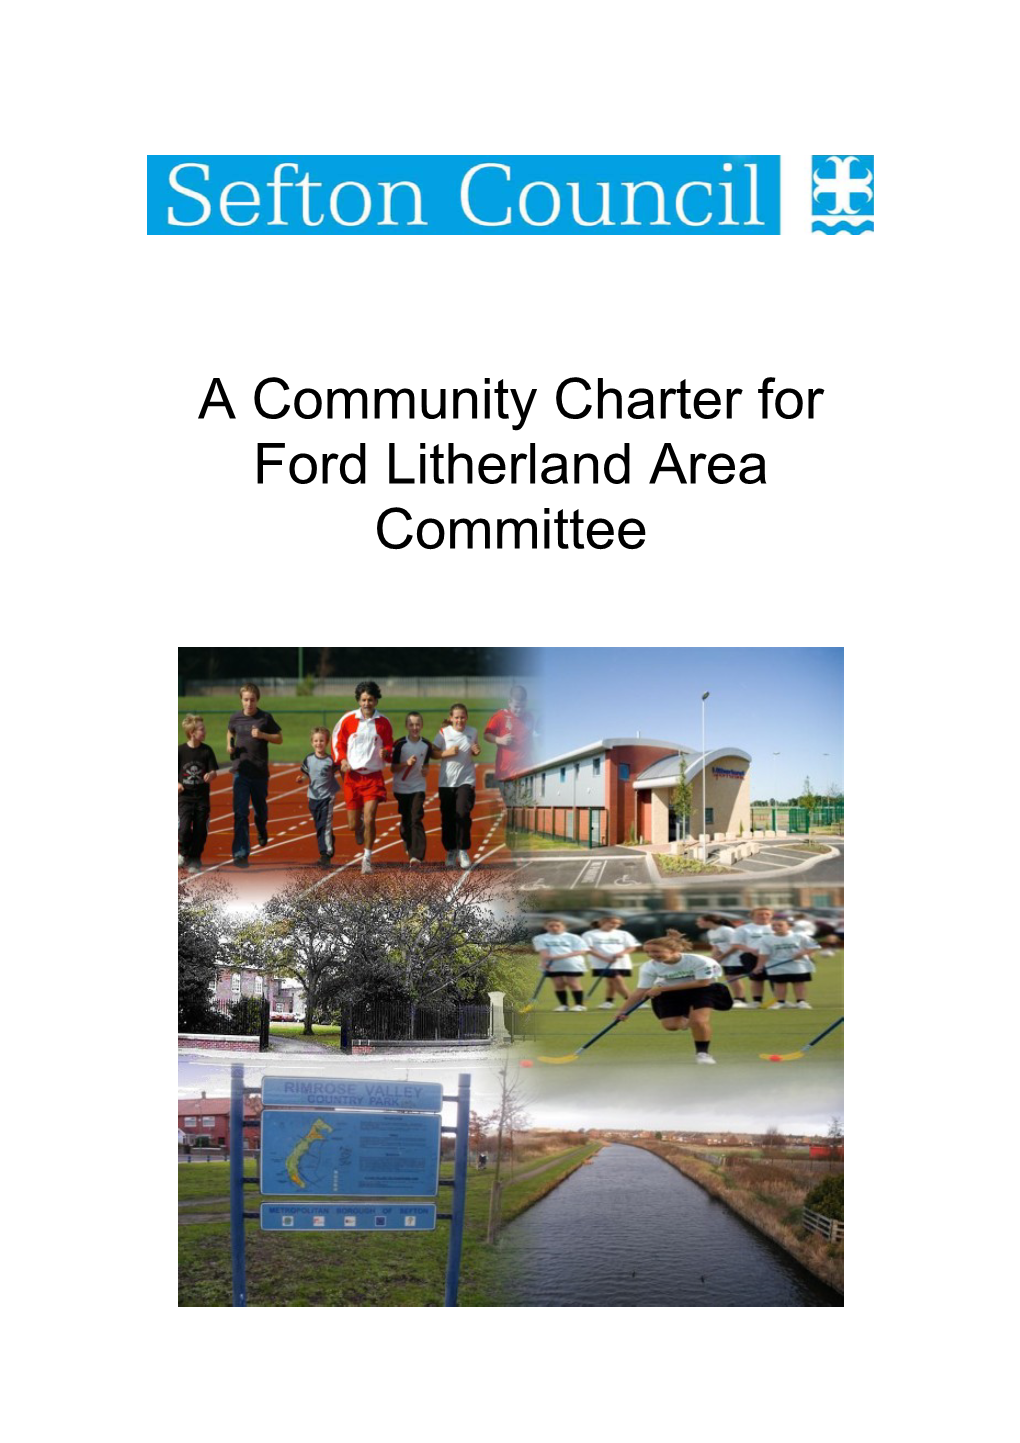 A Community Charter for Ford Litherland Area Committee